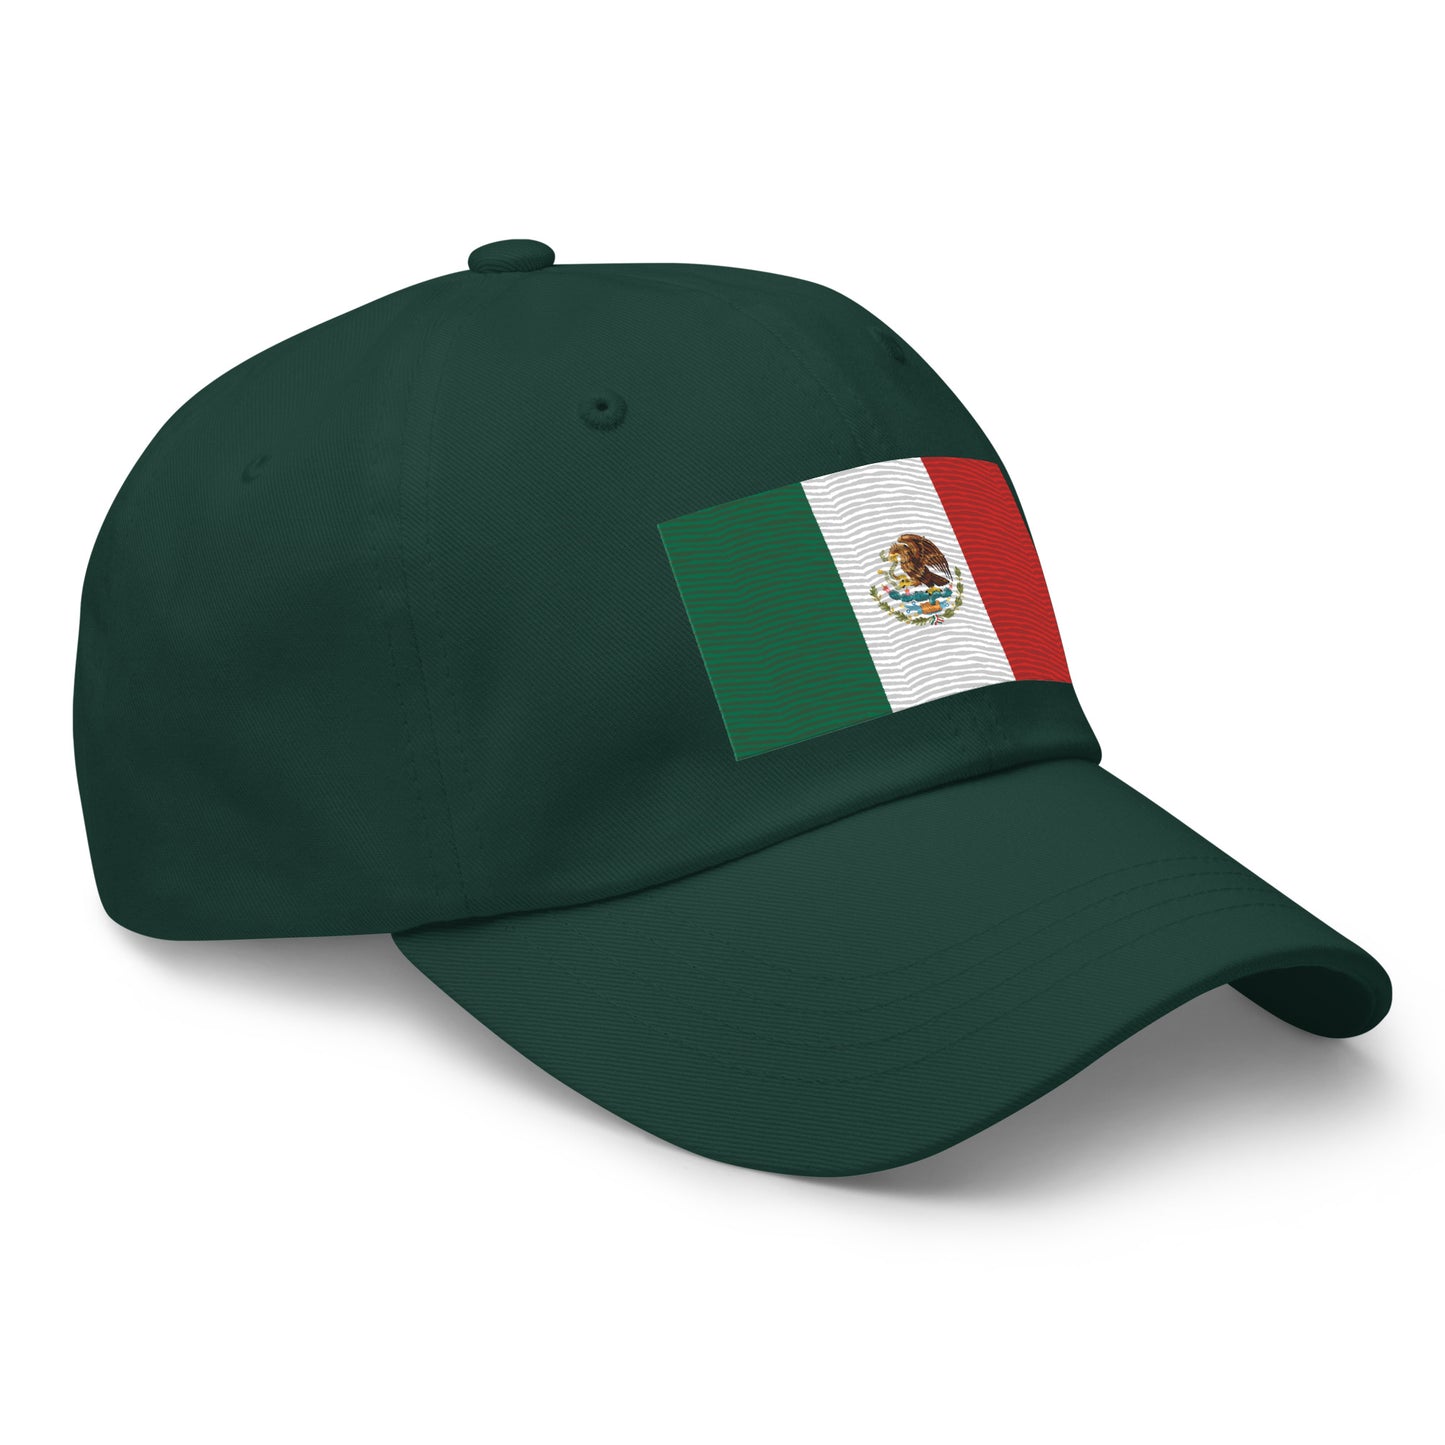 Green Dad Hat Featuring Embroidered Mexican Flag